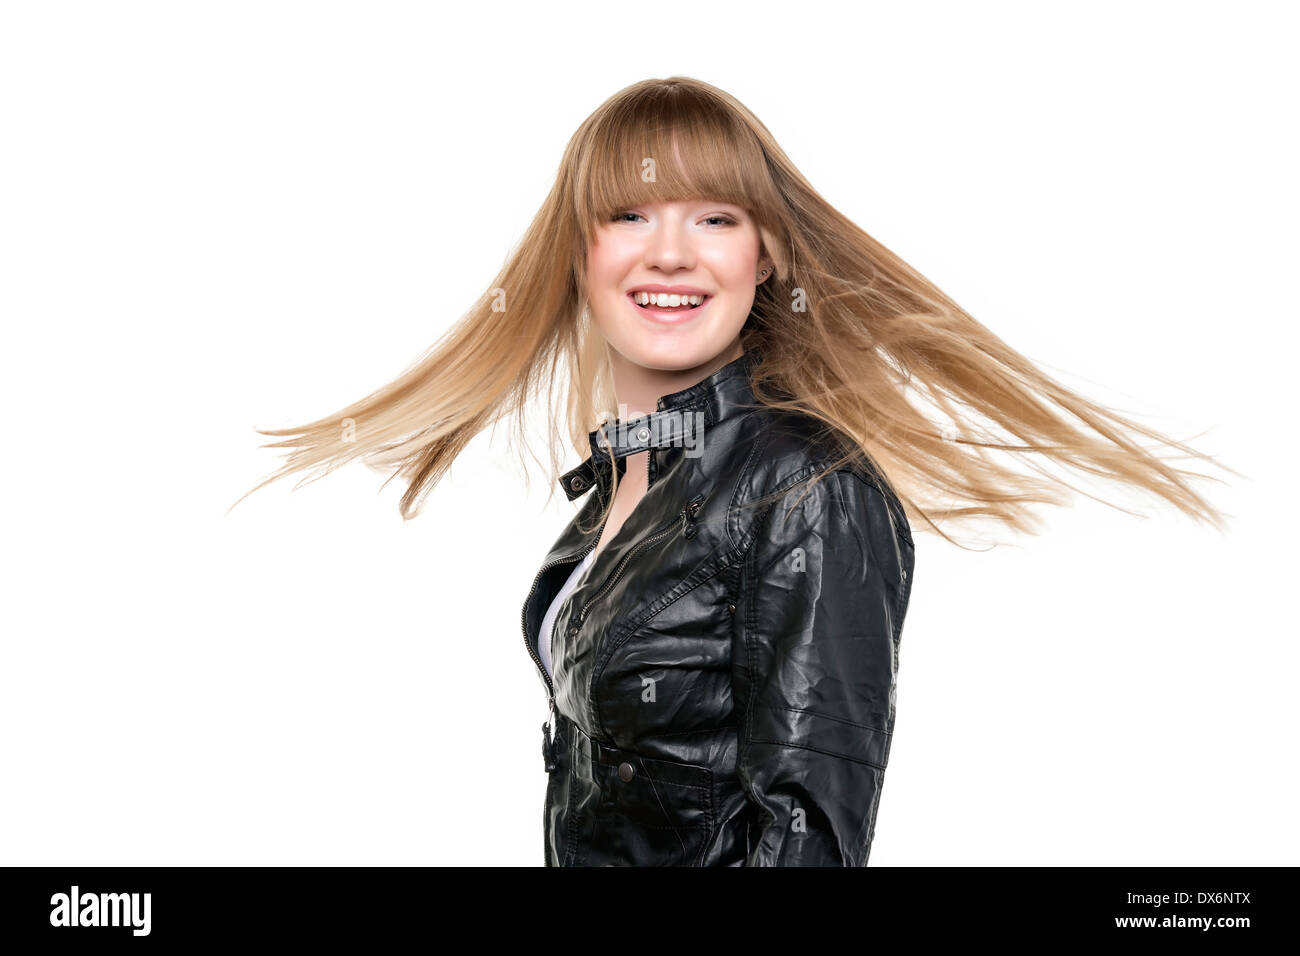 Blond girl with a black leather jacket and waving blond hair Stock Photo